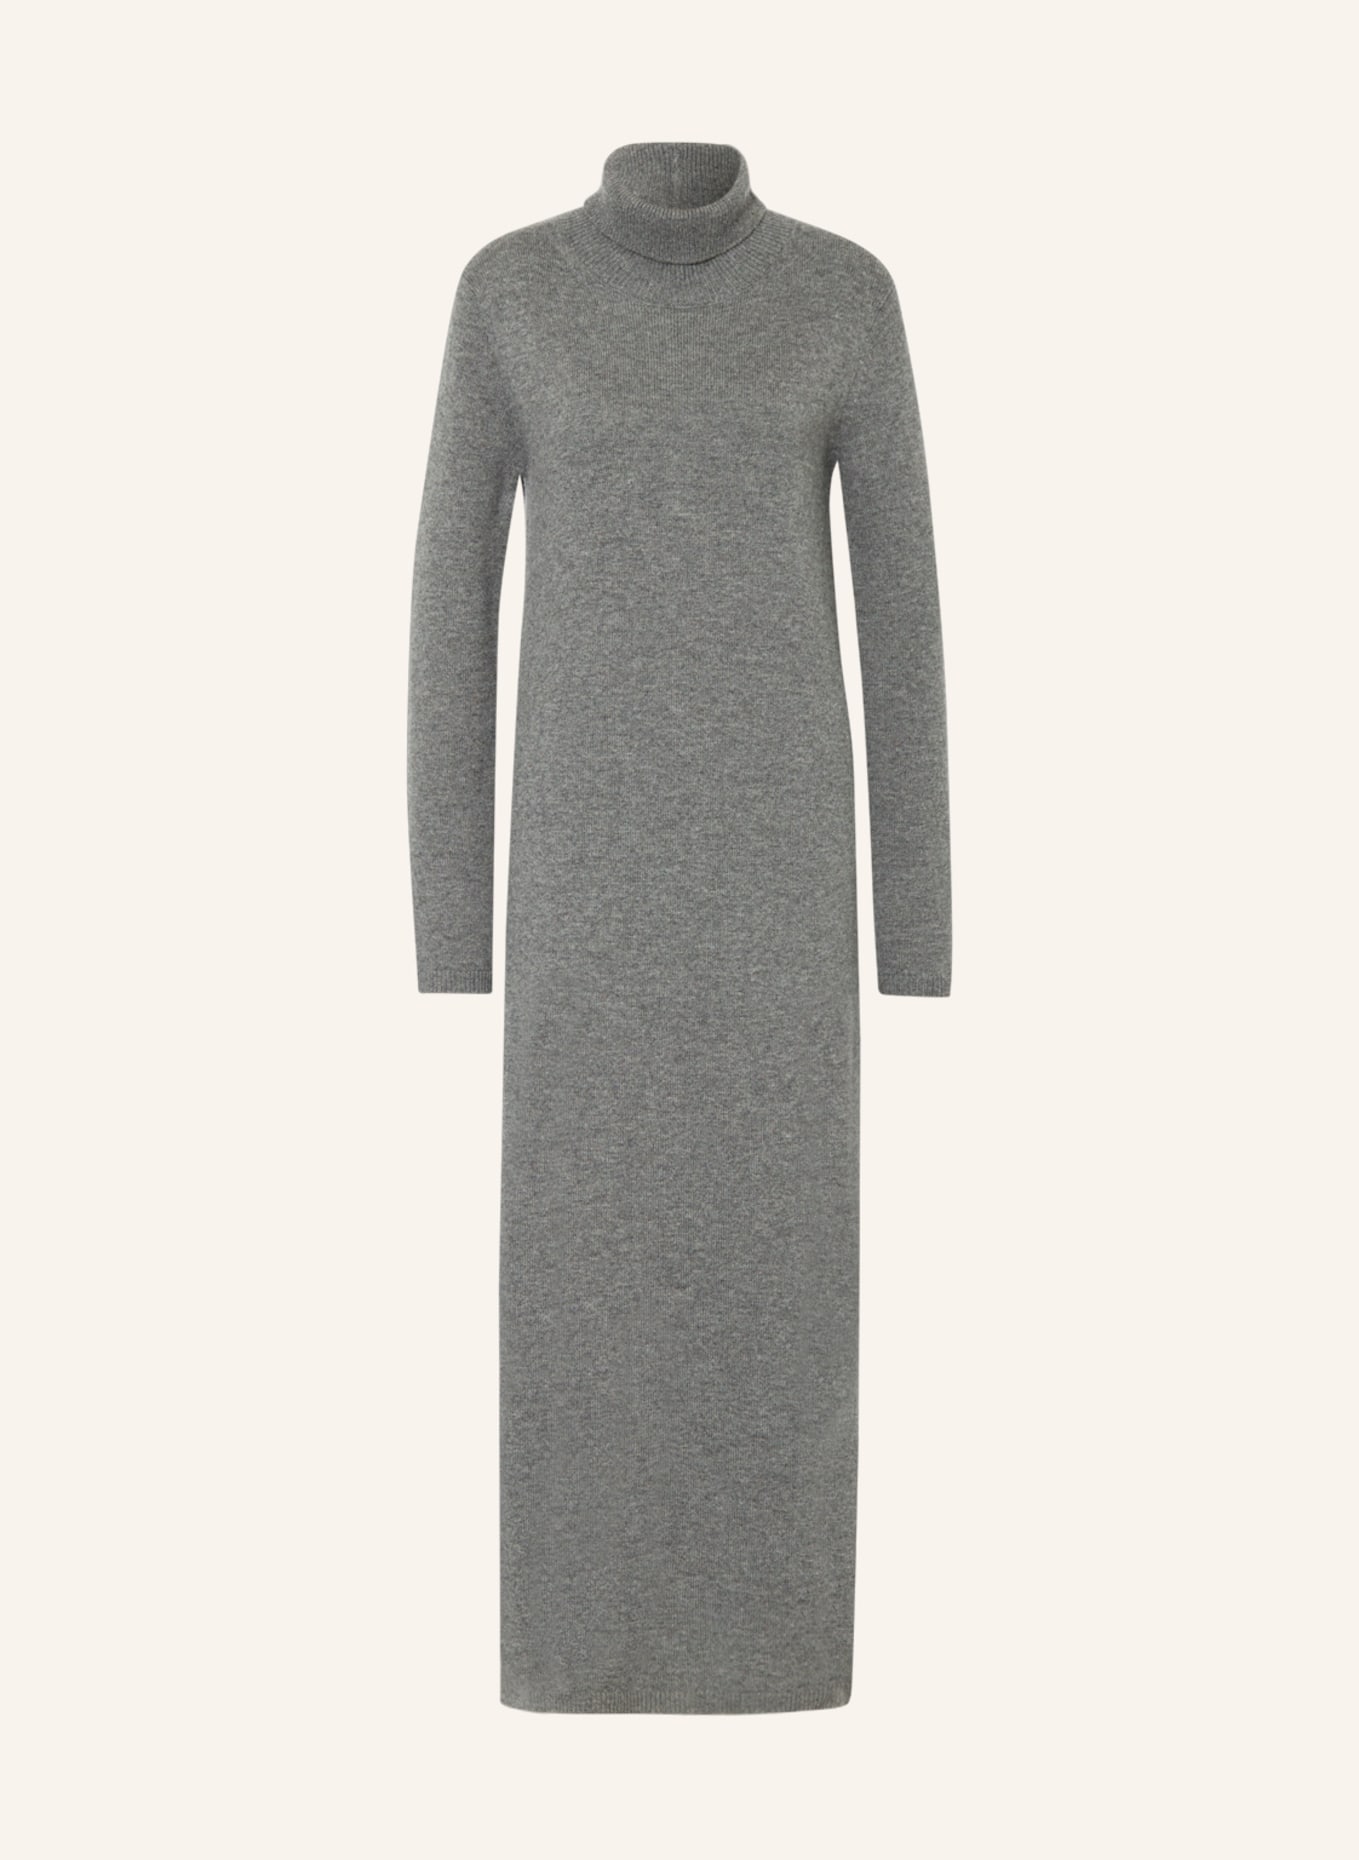 CLOSED Knit dress, Color: GRAY (Image 1)